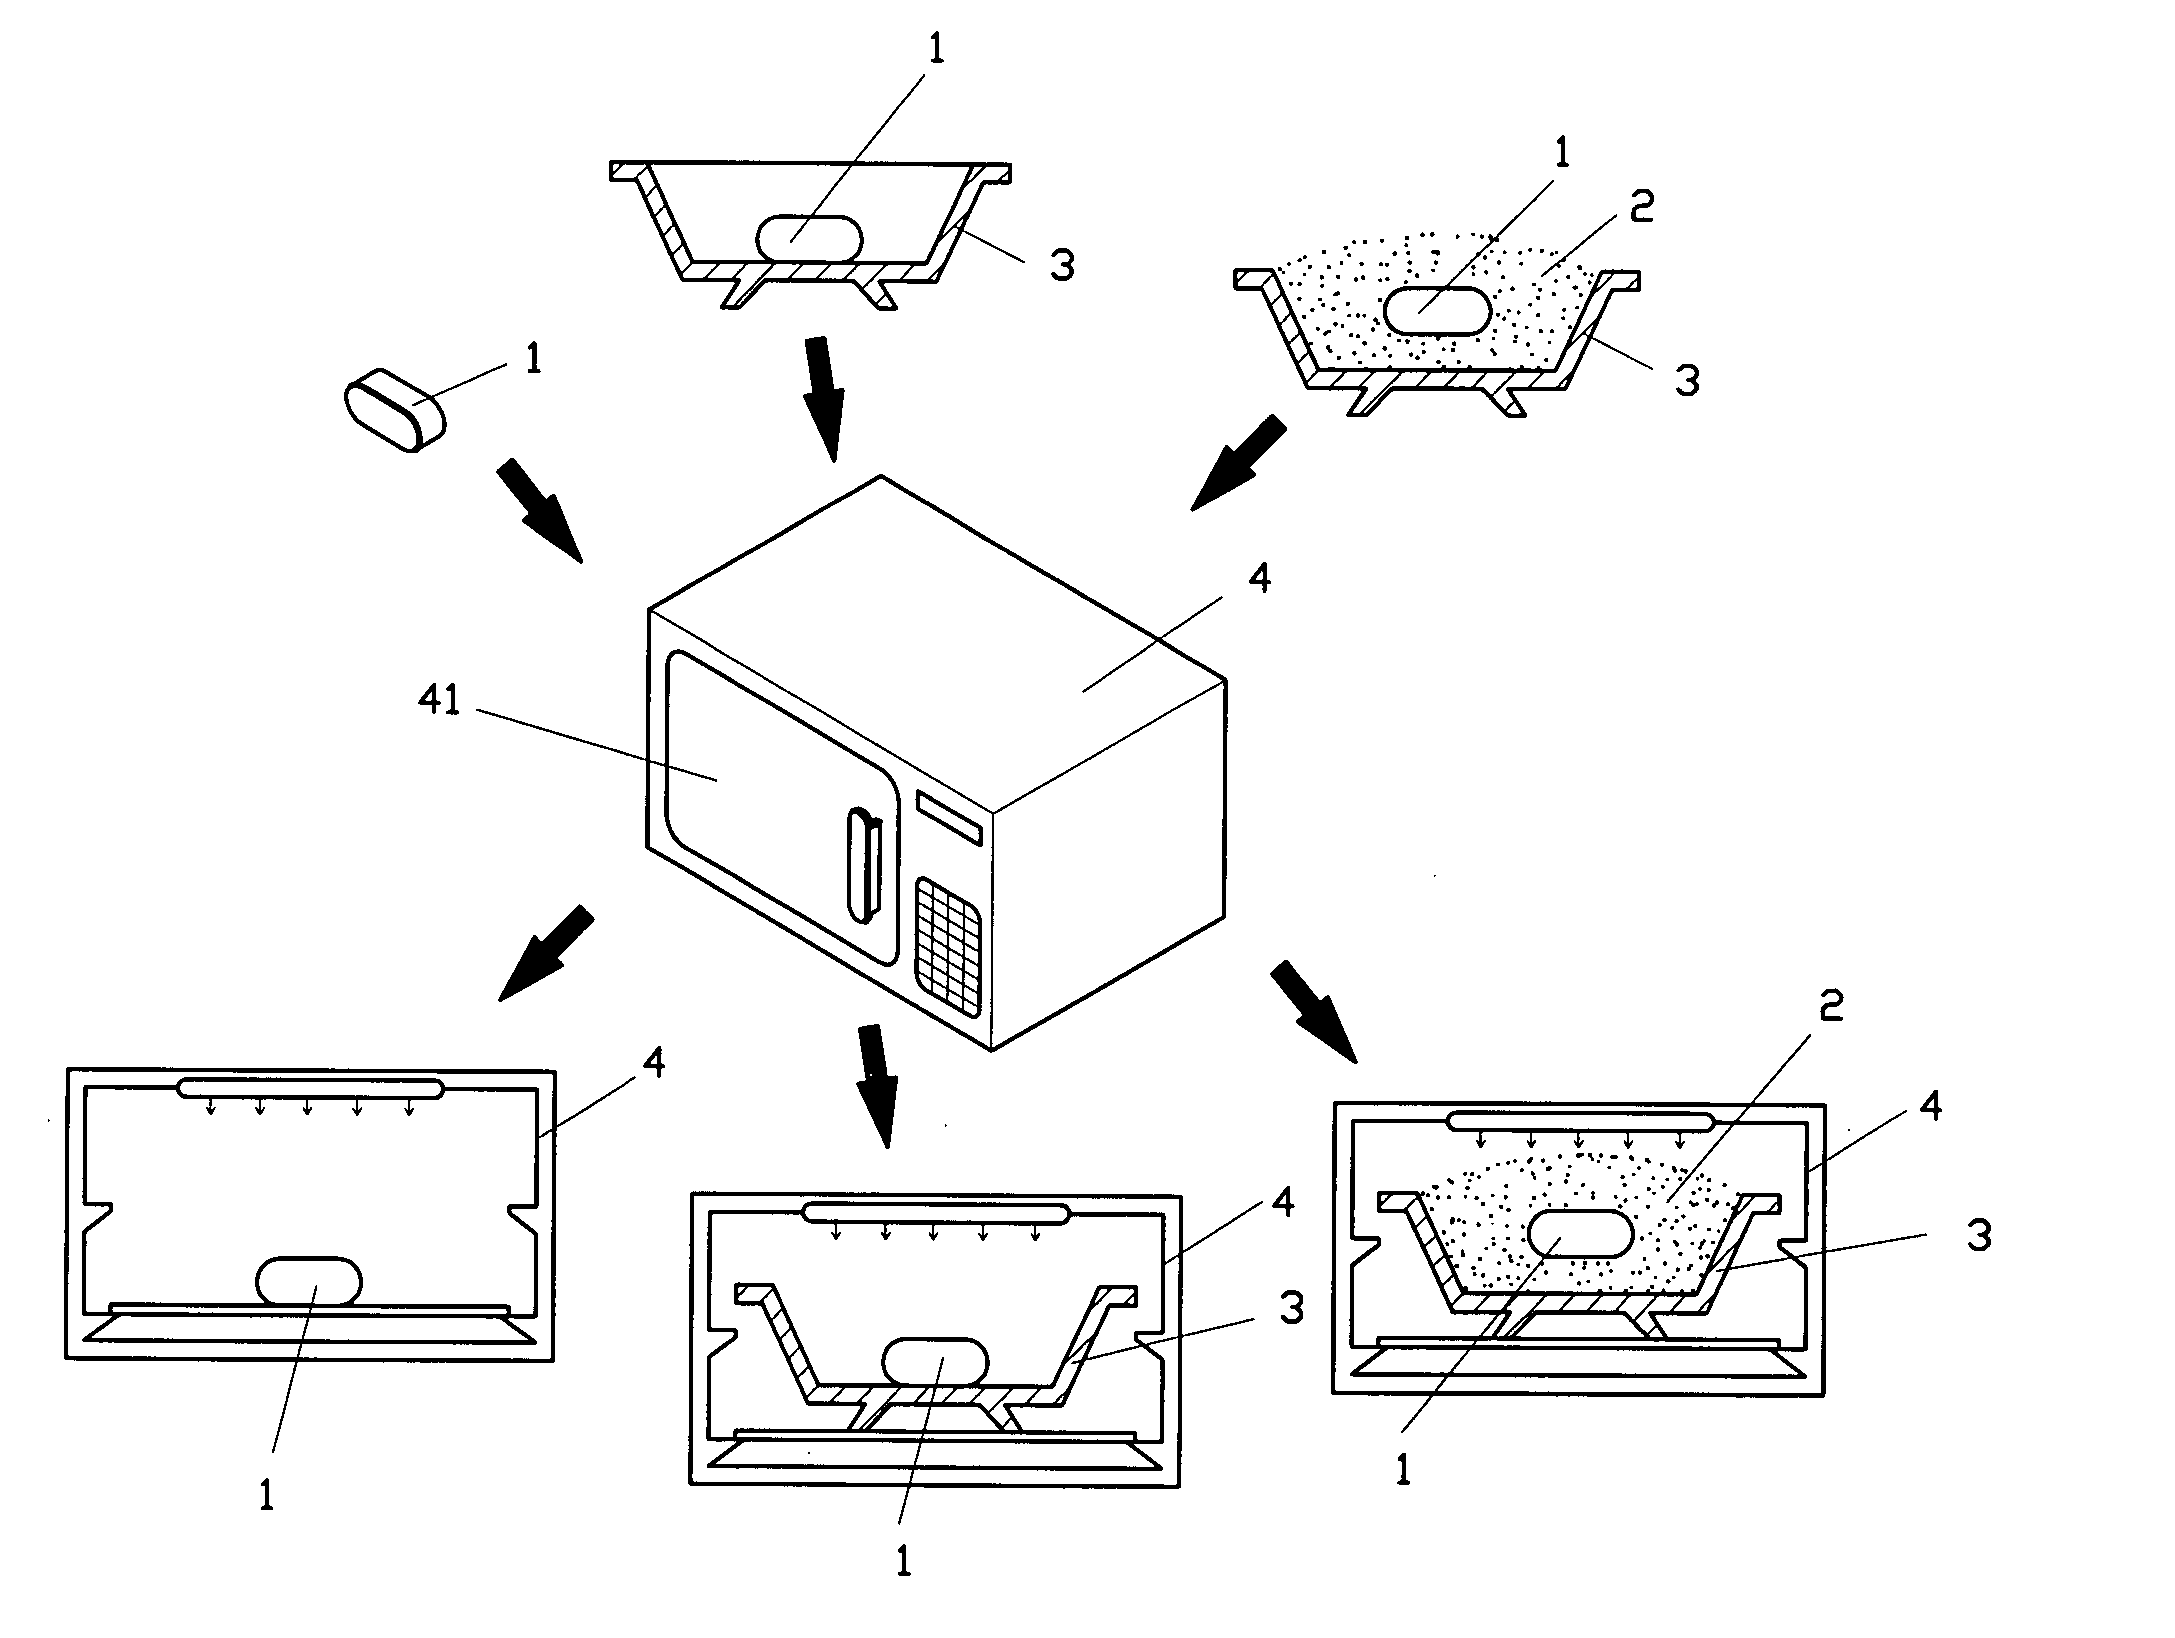 Manufacturing process using microwave for thermal debinding